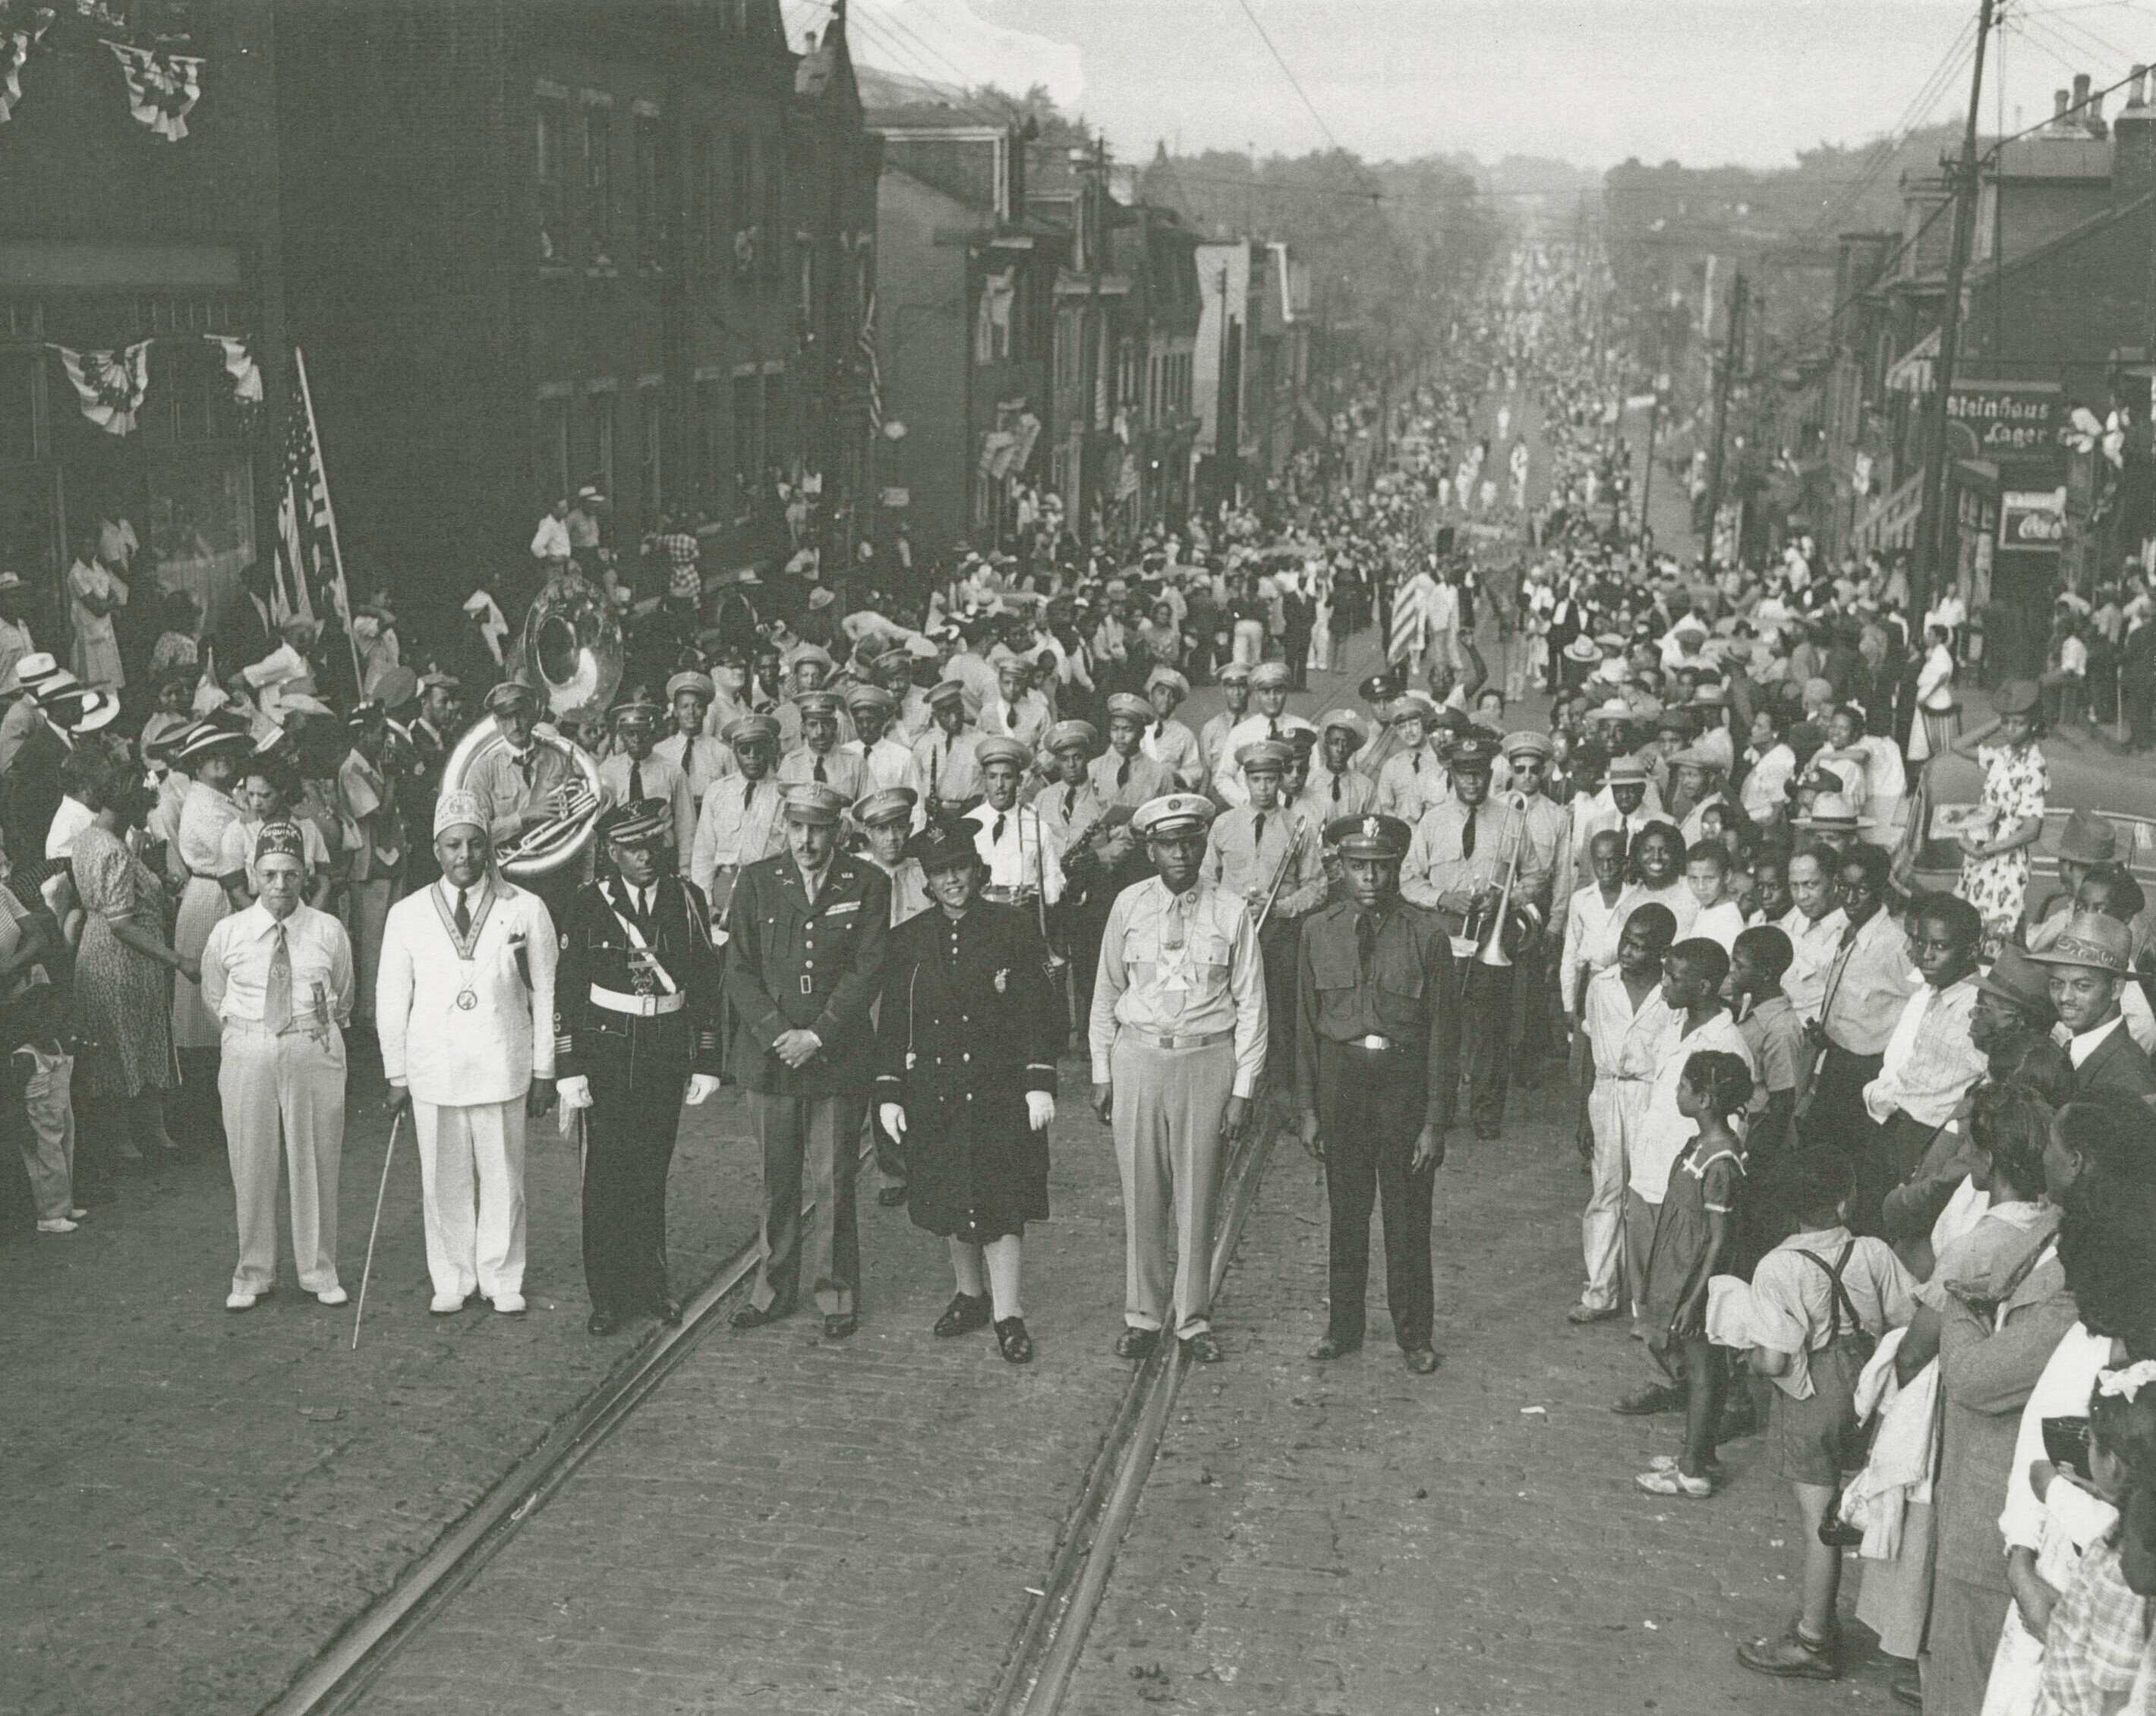 A black and white photograph of the annual Elks parade procession on the second hill of Wylie Avenue in Pittsburgh's Hill District.